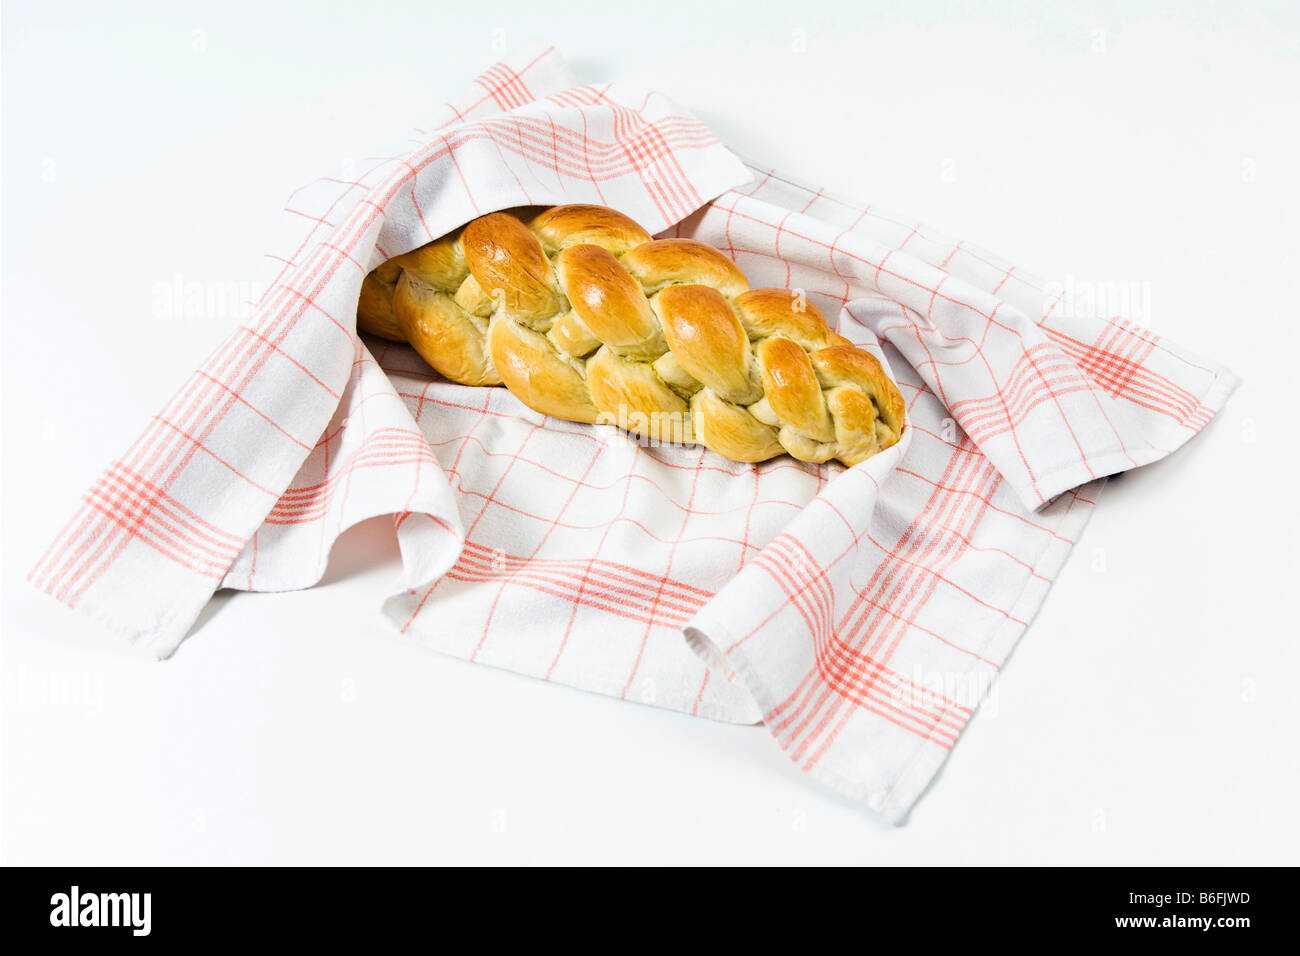 Braided bread or plaited loaf in a tea towel Stock Photo